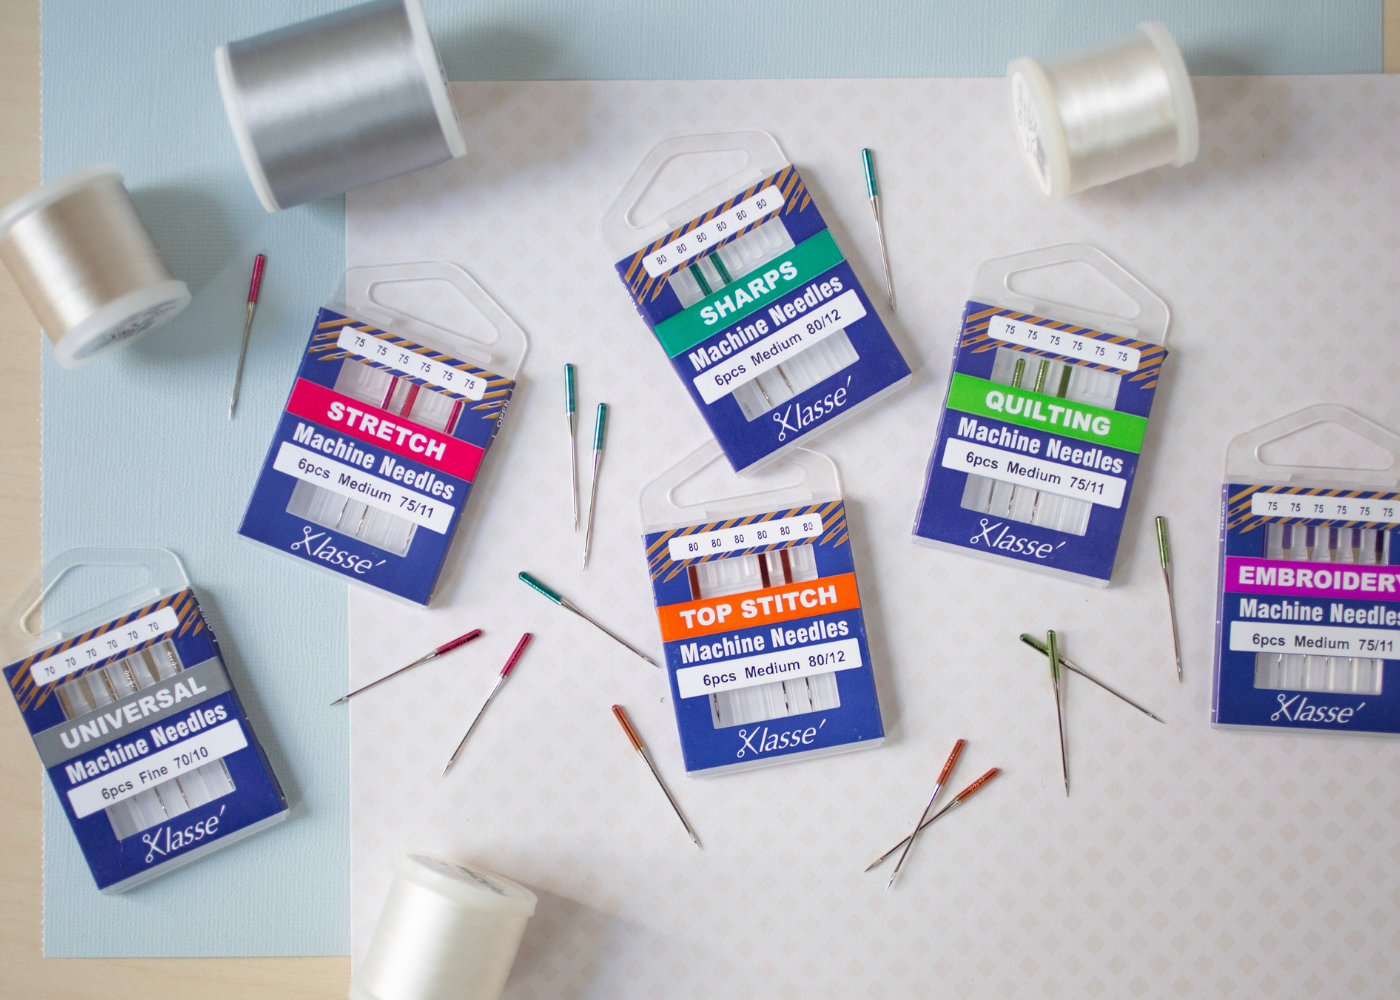 The 7 Absolute Must Have Sewing Tools for Beginners Starting to Sew — Sew  Sew Lounge